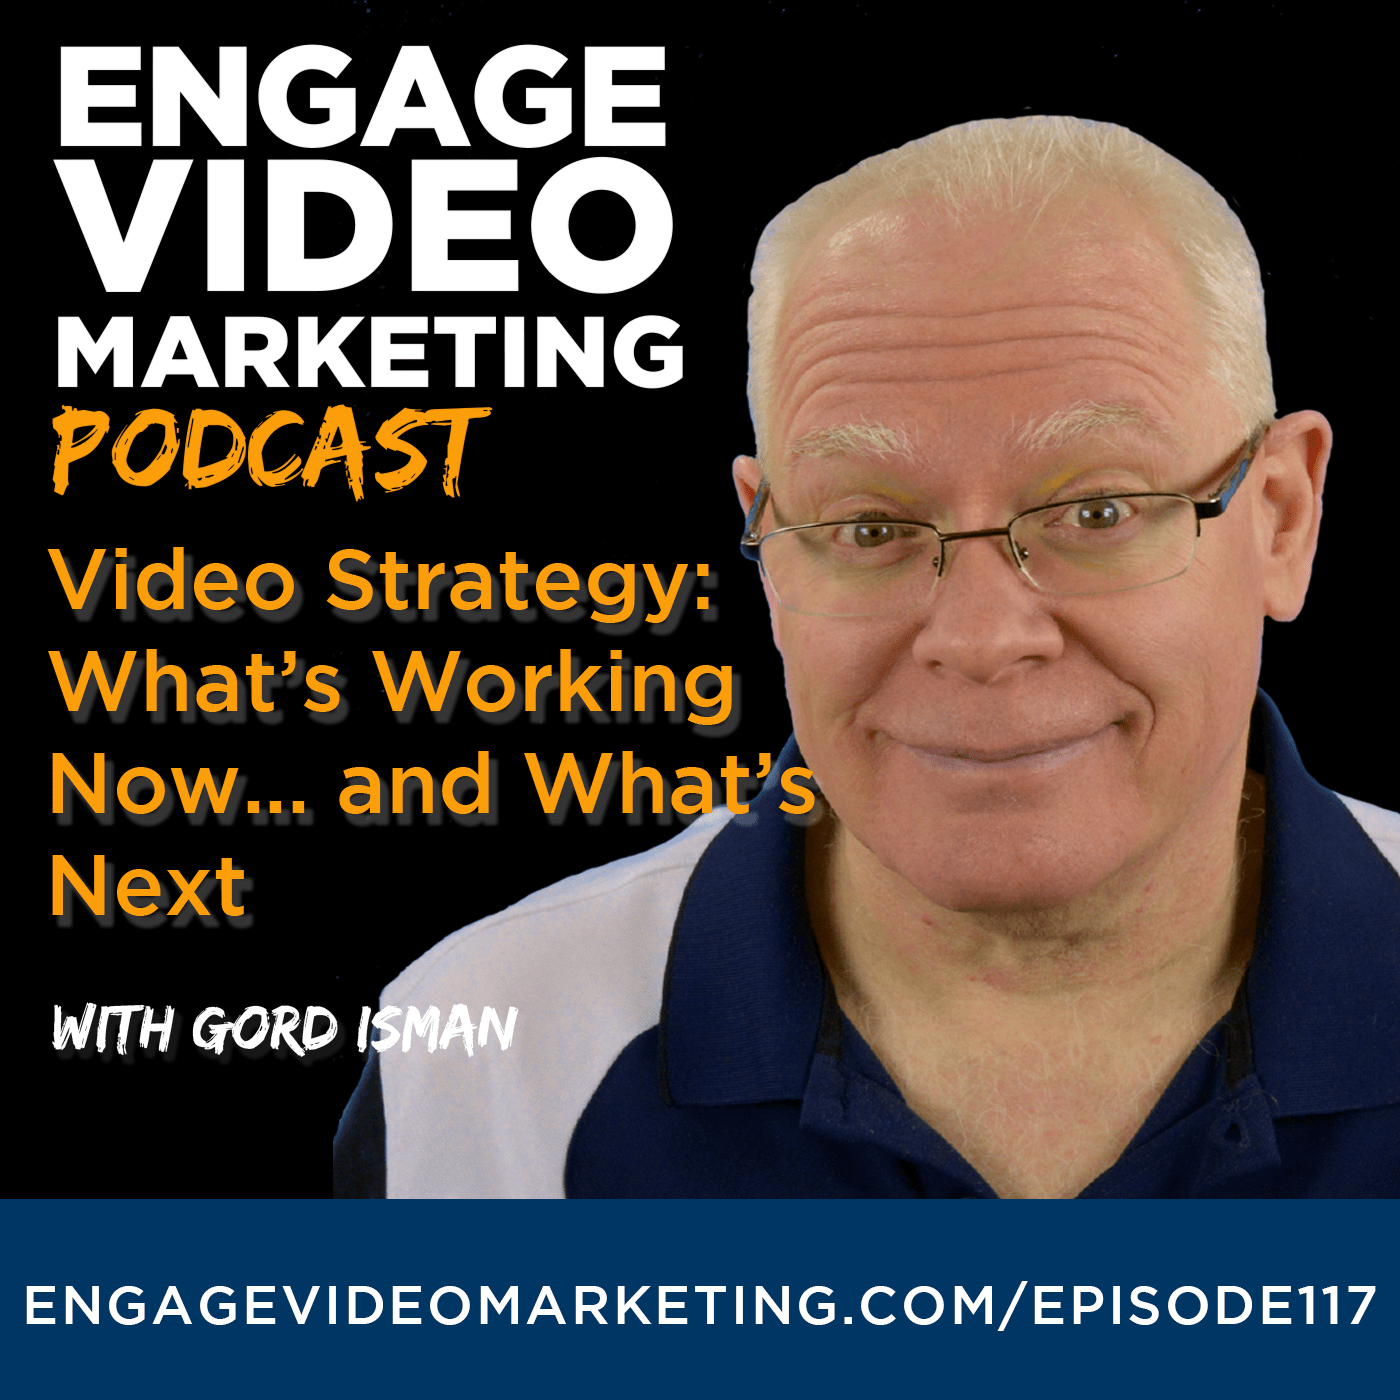 Video Strategy: What’s Working Now… and What’s Next with Gord Isman